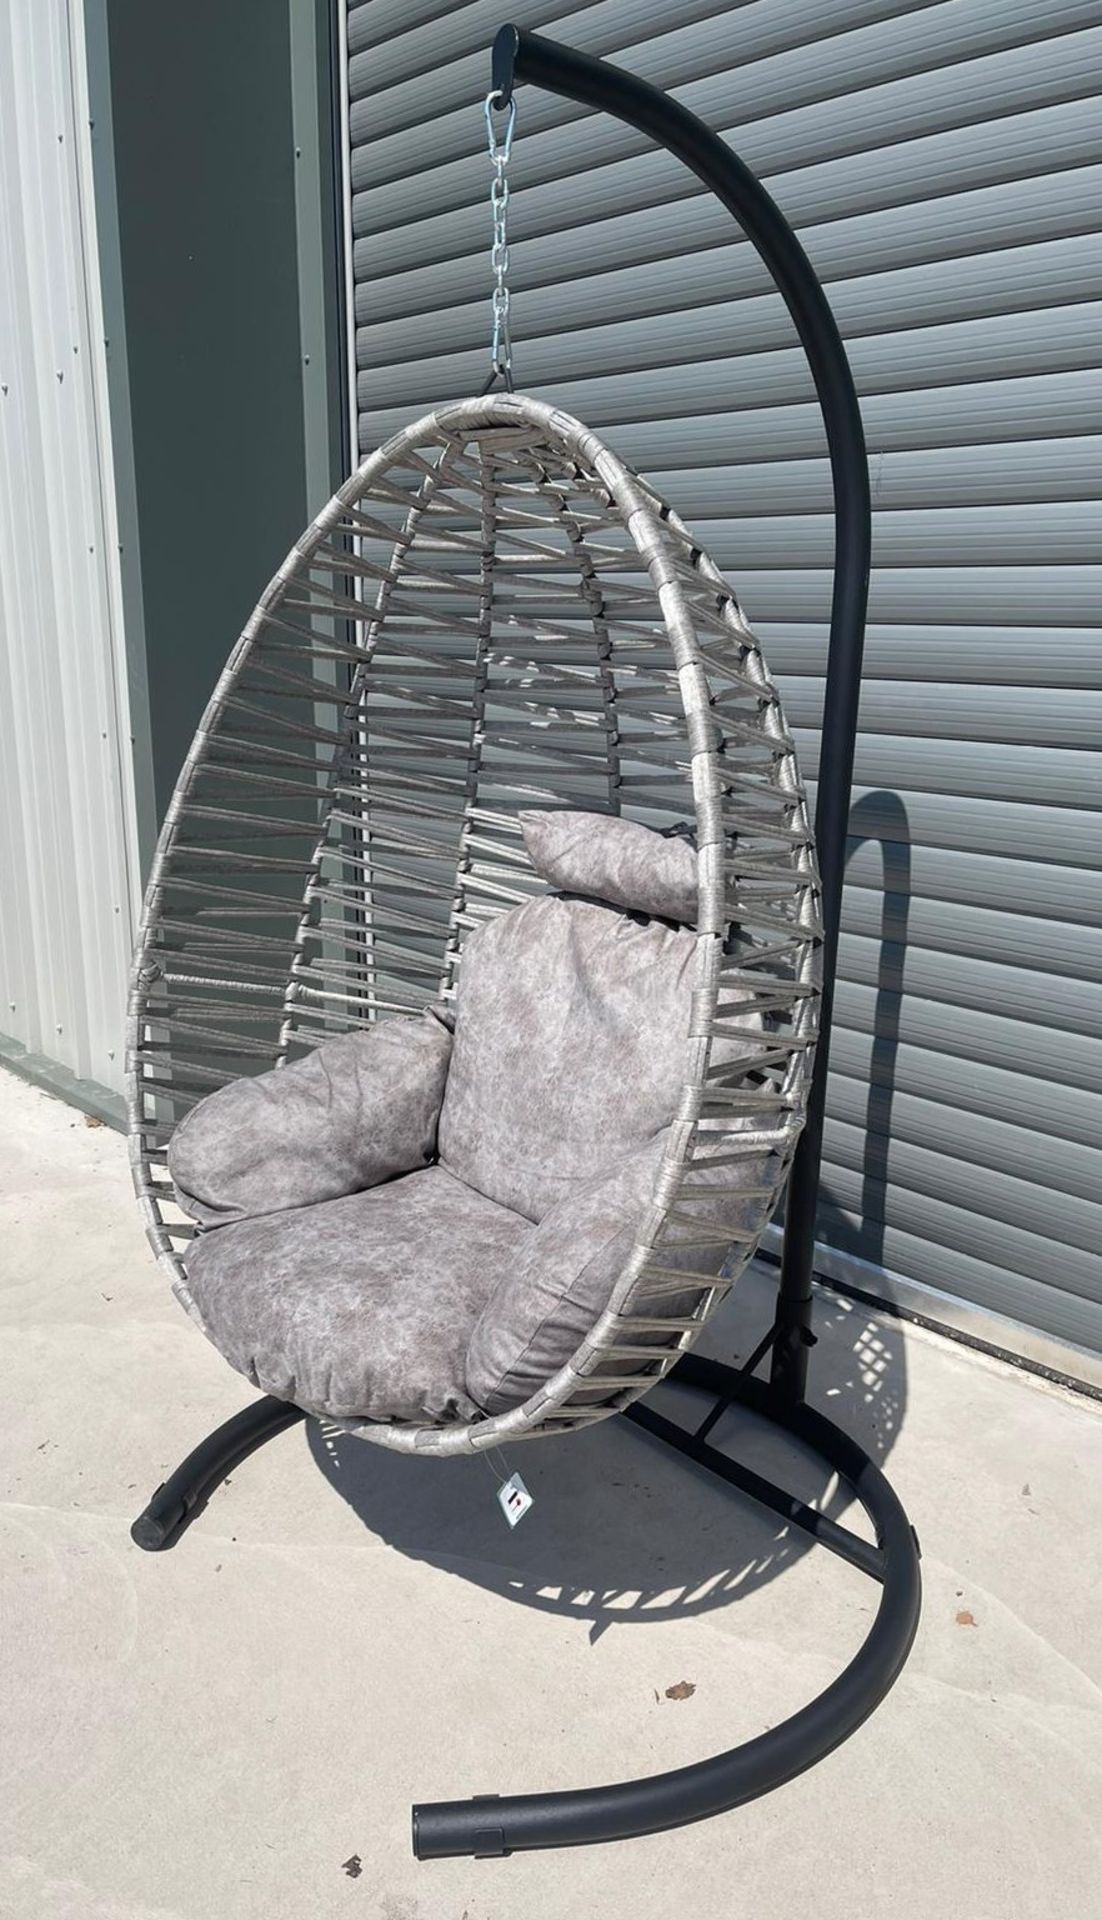 RRP Â£399 - Large Grey Woven Indoor/Outdoor Swinging Egg Chair - Our egg chair provides portable and - Image 2 of 3